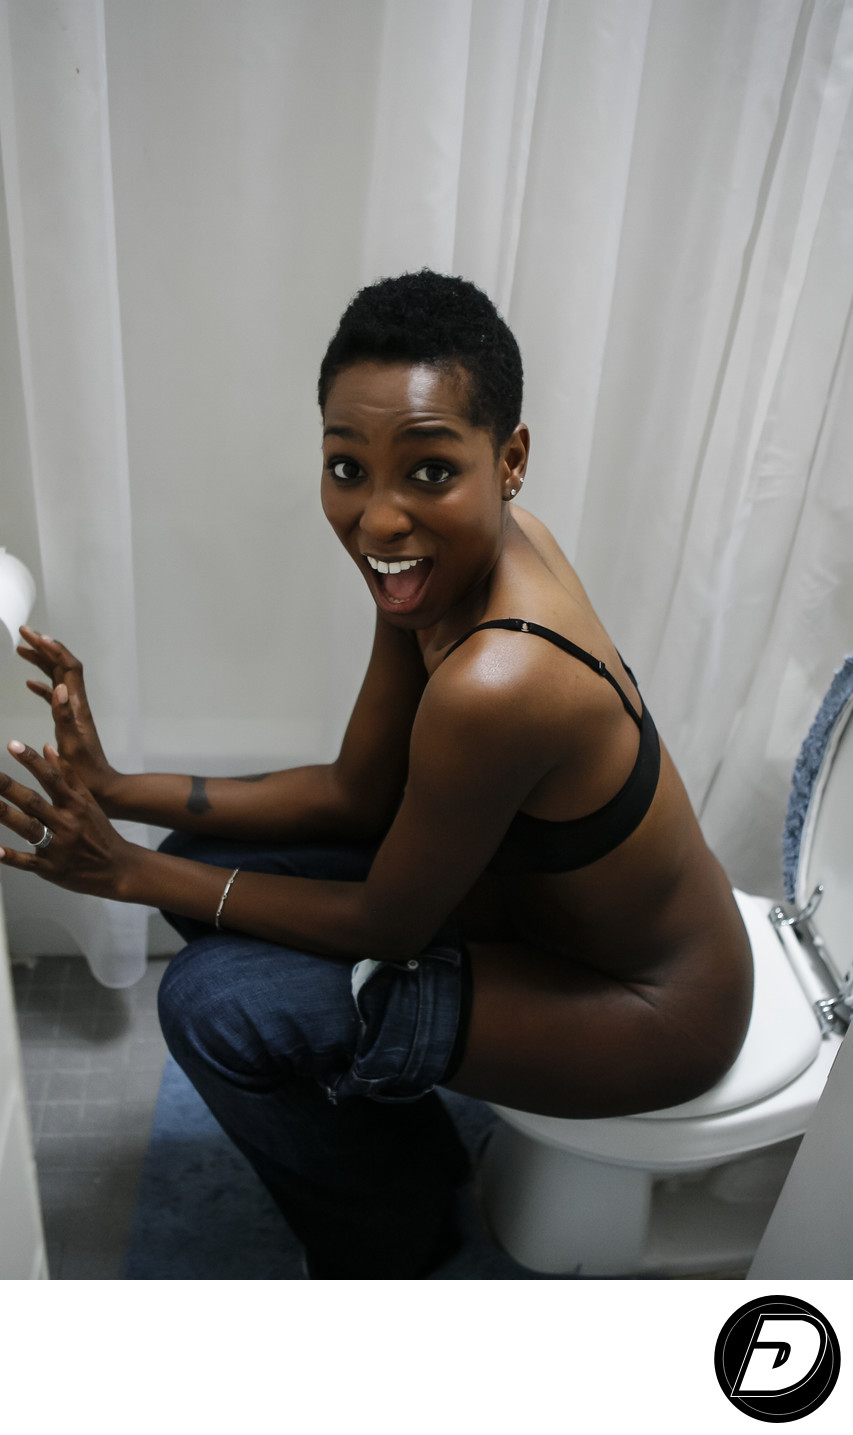 Surprised Looking Woman Sitting On Toilet Photographer